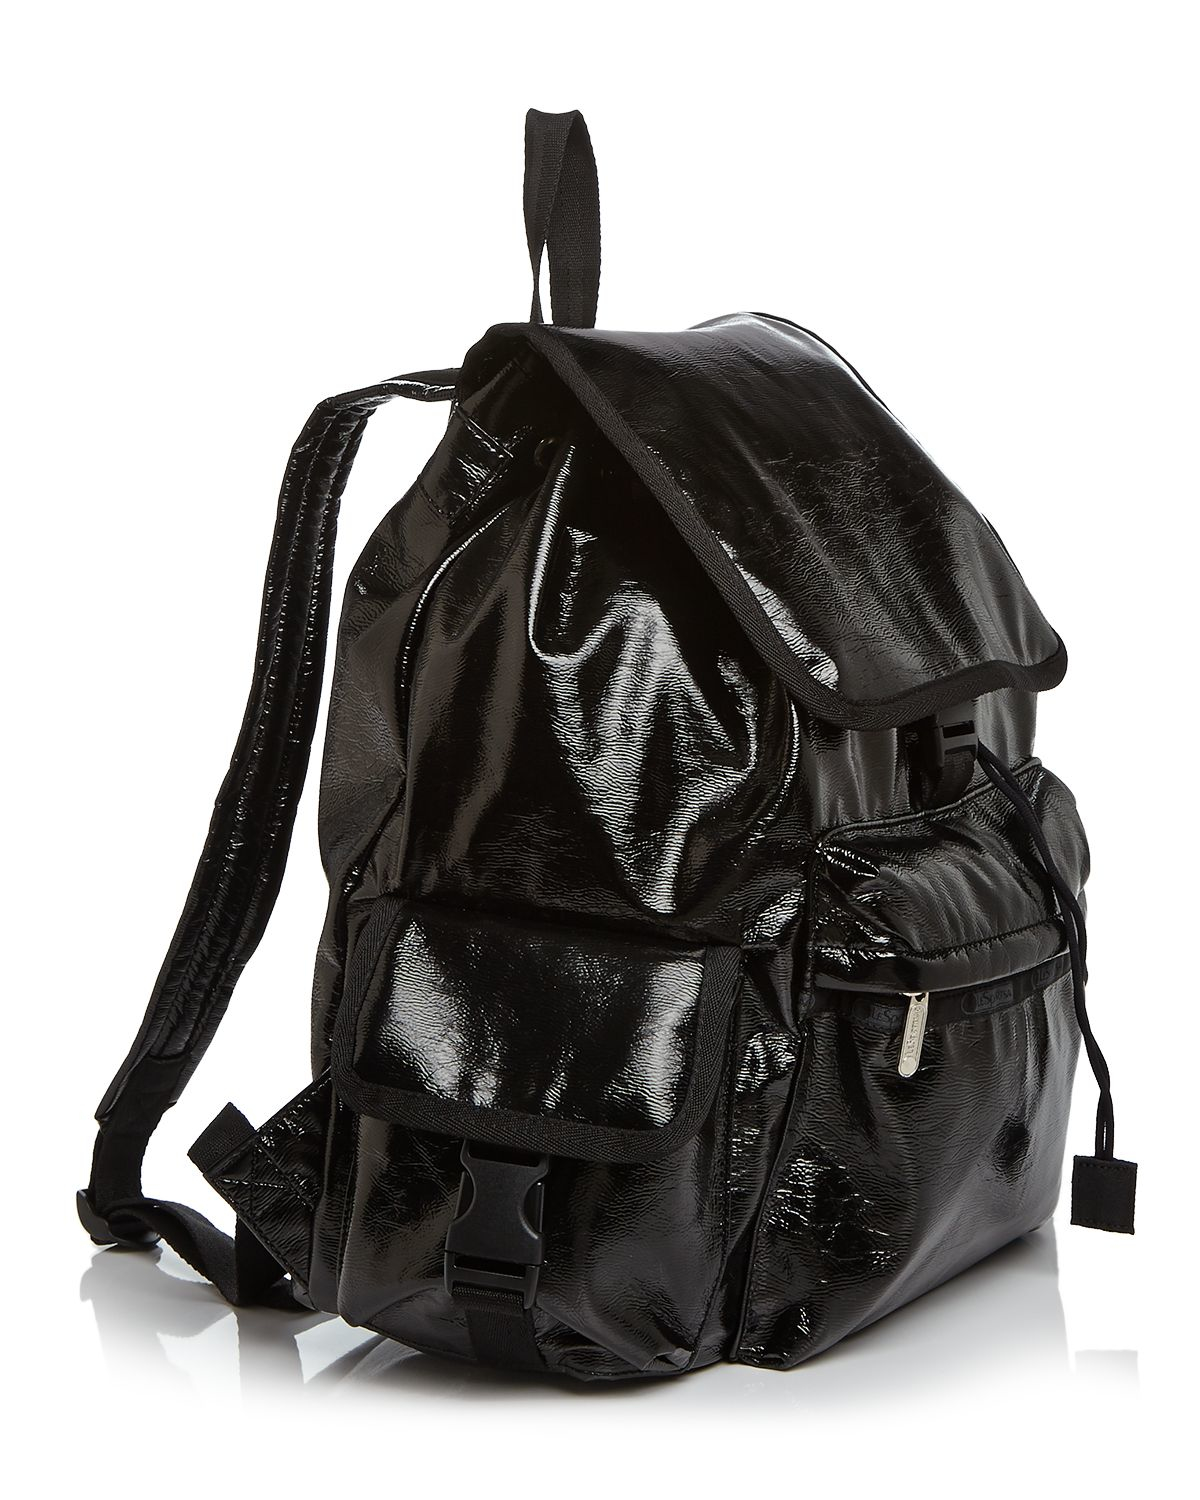 Lyst - LeSportsac Patent Voyager Backpack - Black Patent in Black